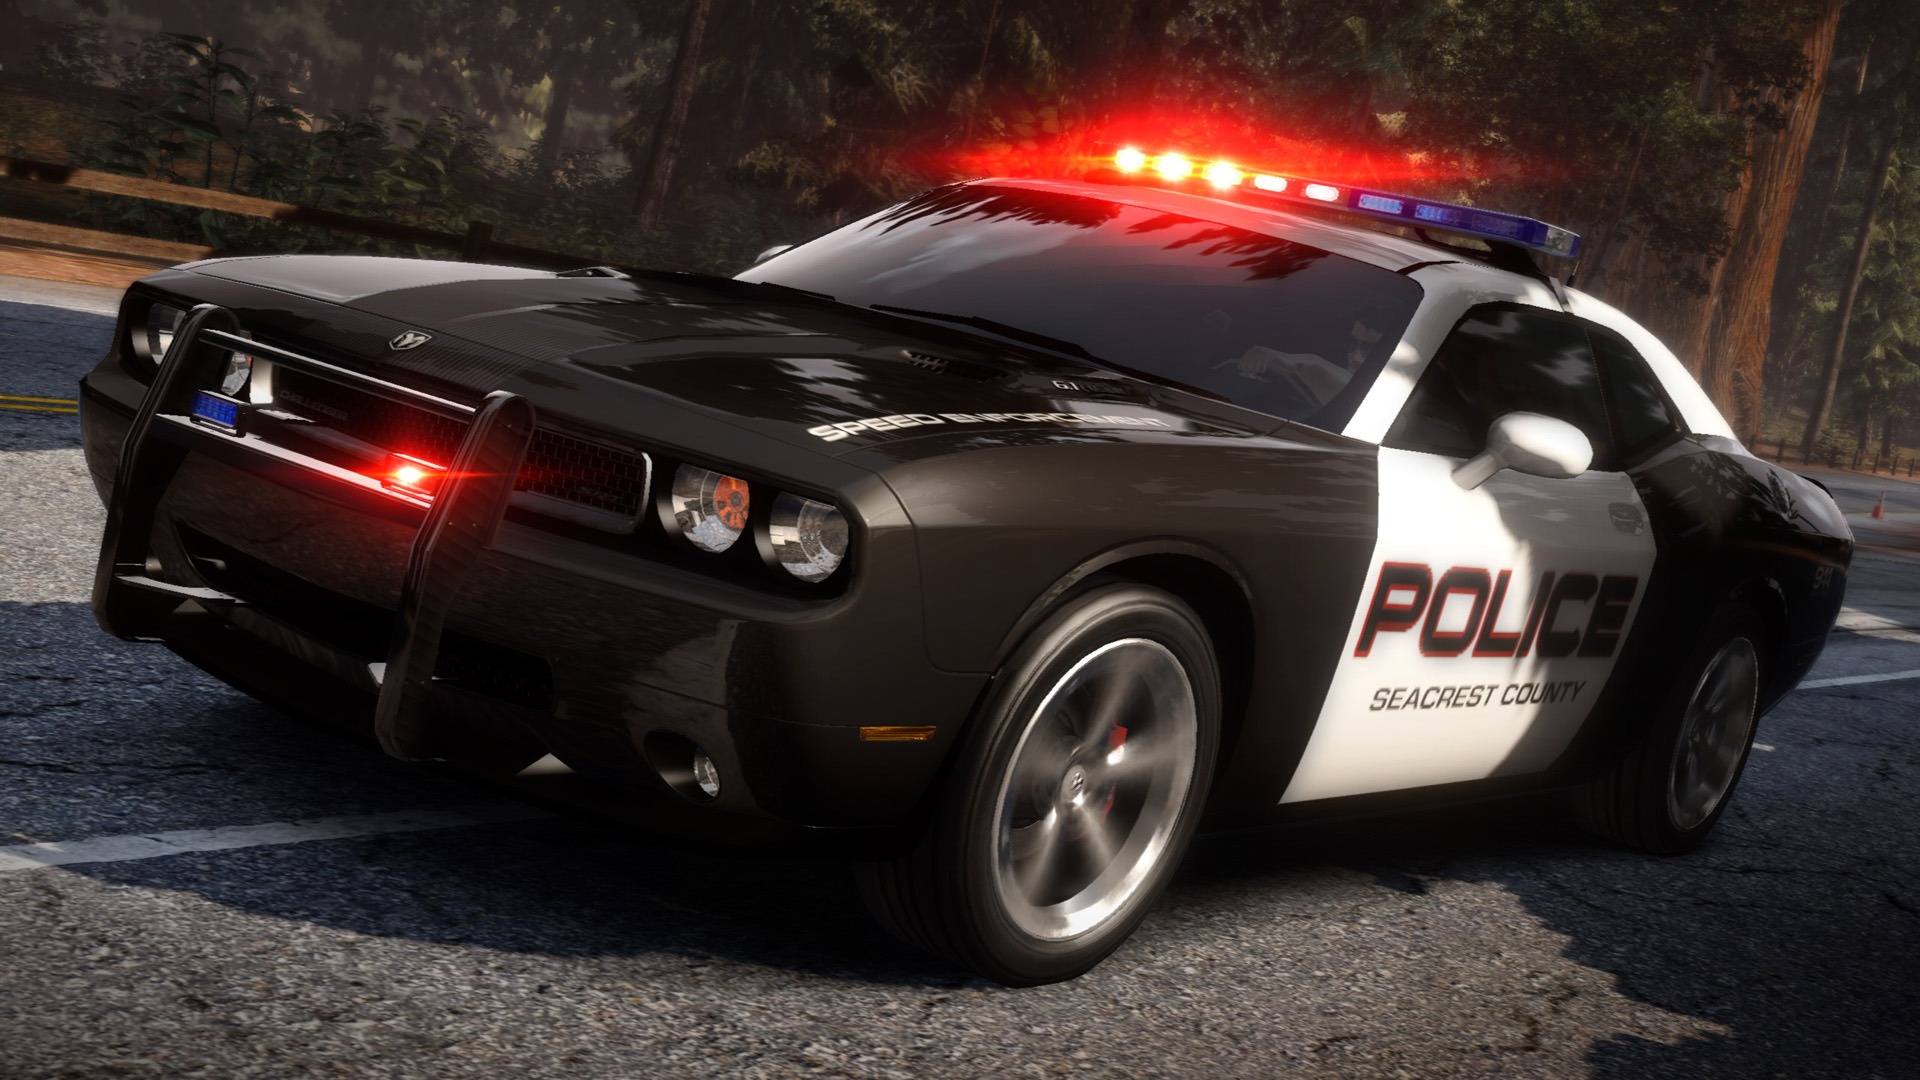 Need for Speed: Hot Pursuit 极品飞车14：热力追踪10 - 1920x1080